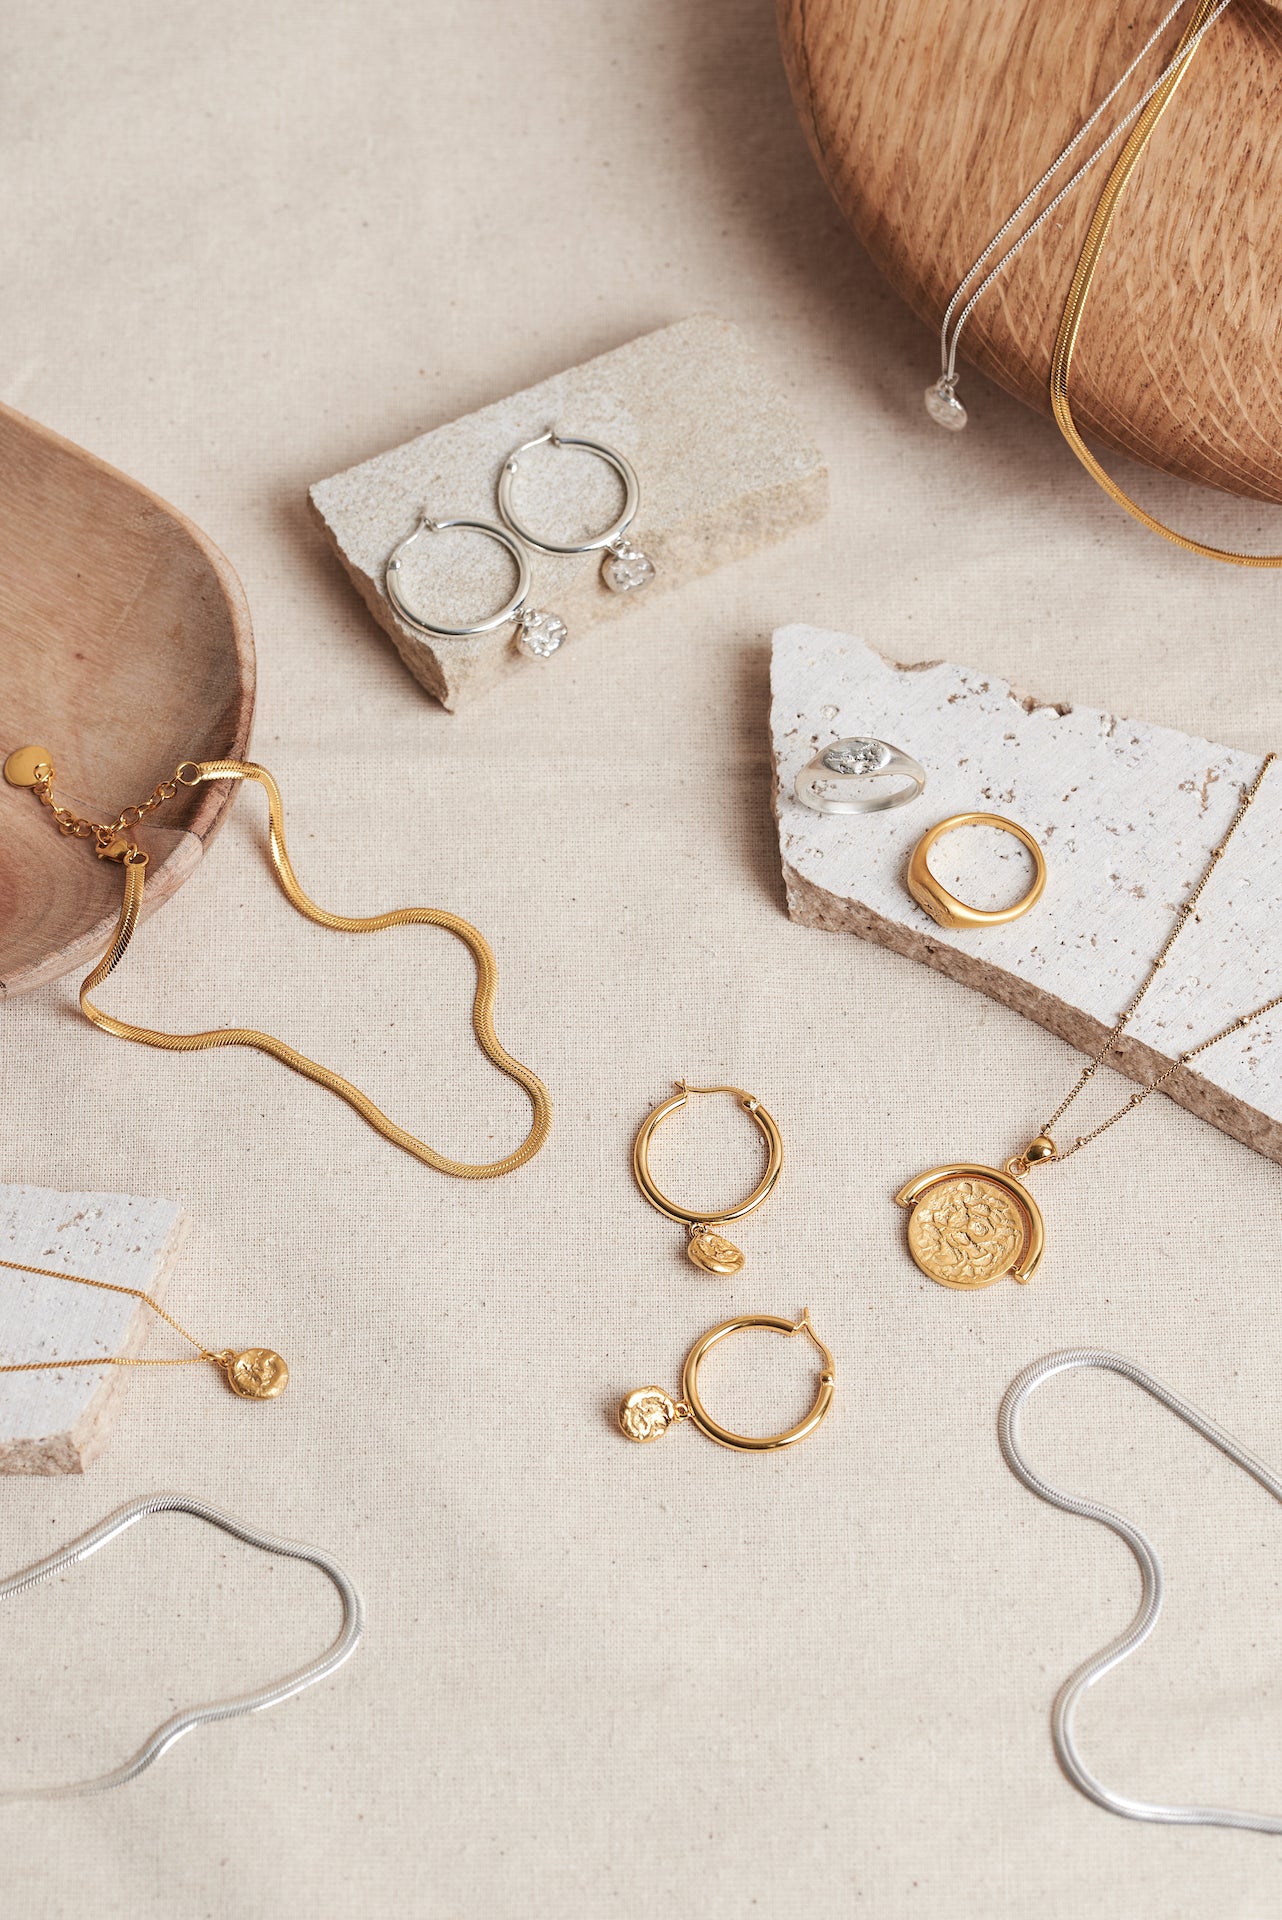 DESIGNED BY MEGAN COLLINS, the Limited Edition Equilibrium Collection that celebrates the art of balance in every aspect of life.